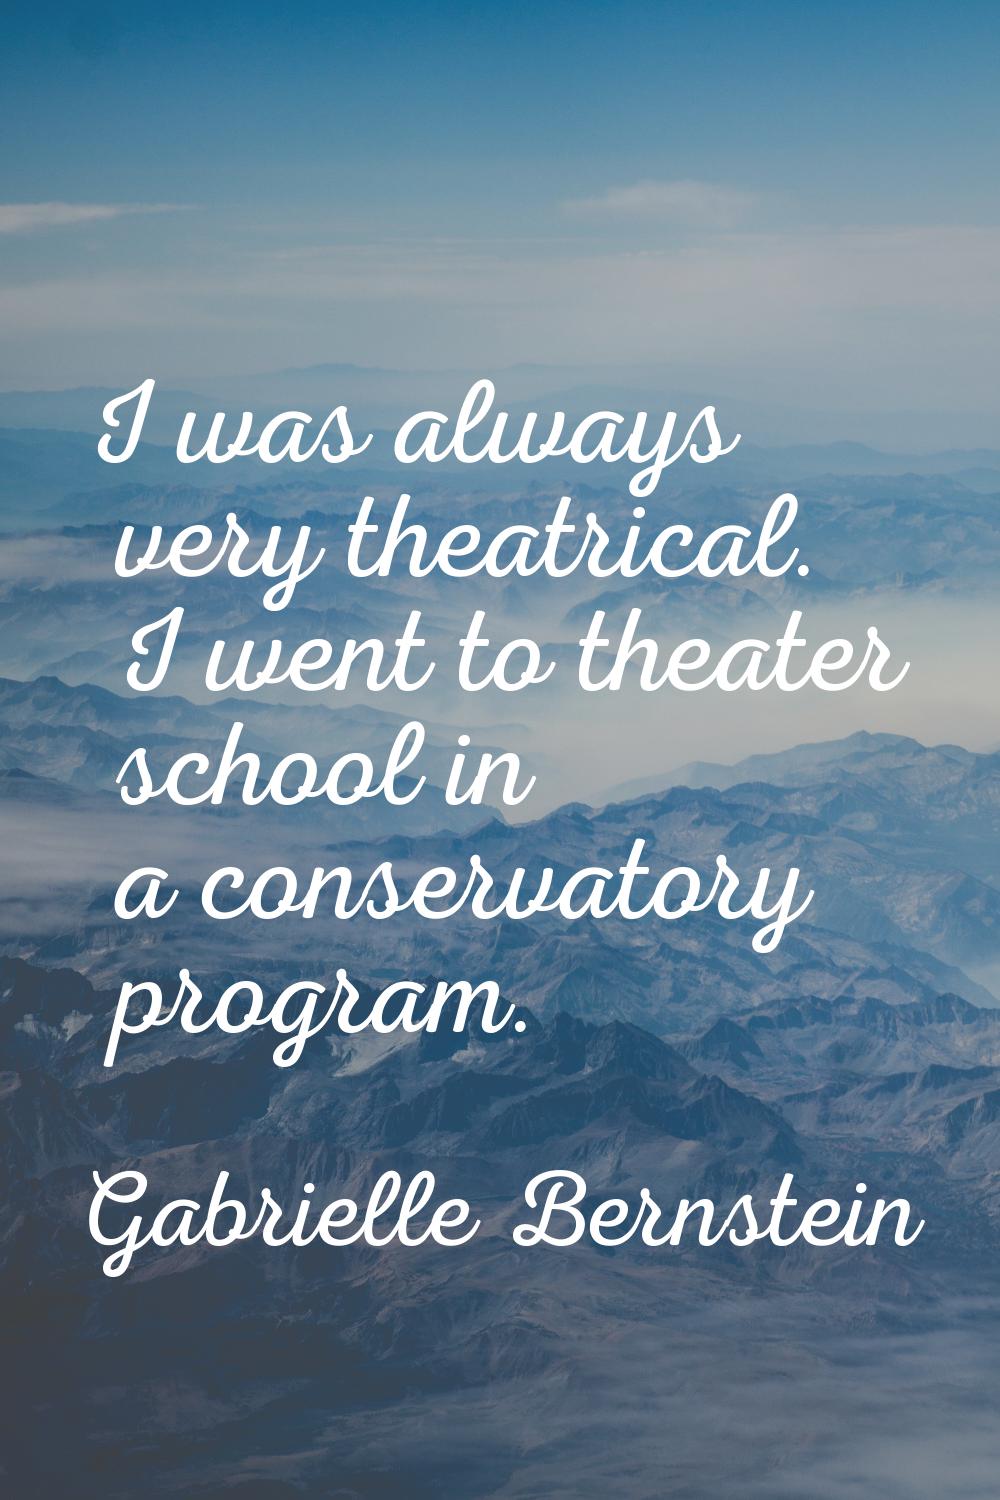 I was always very theatrical. I went to theater school in a conservatory program.